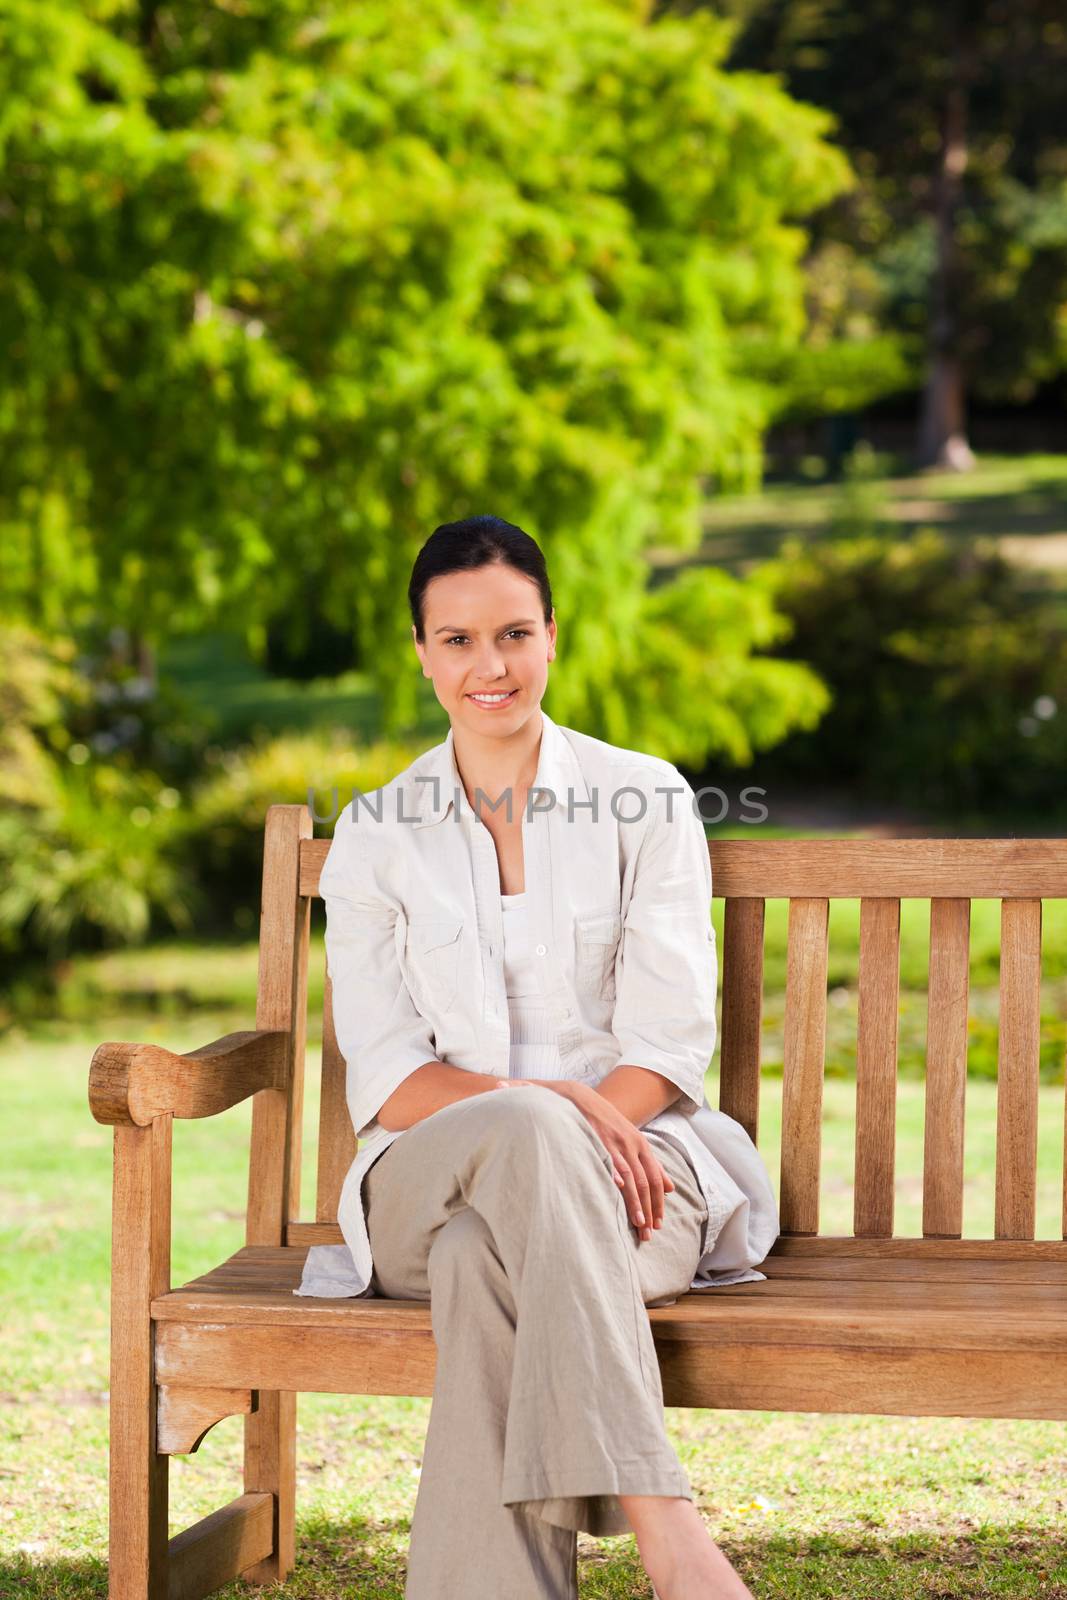 Brunette woman on the bench during the summer